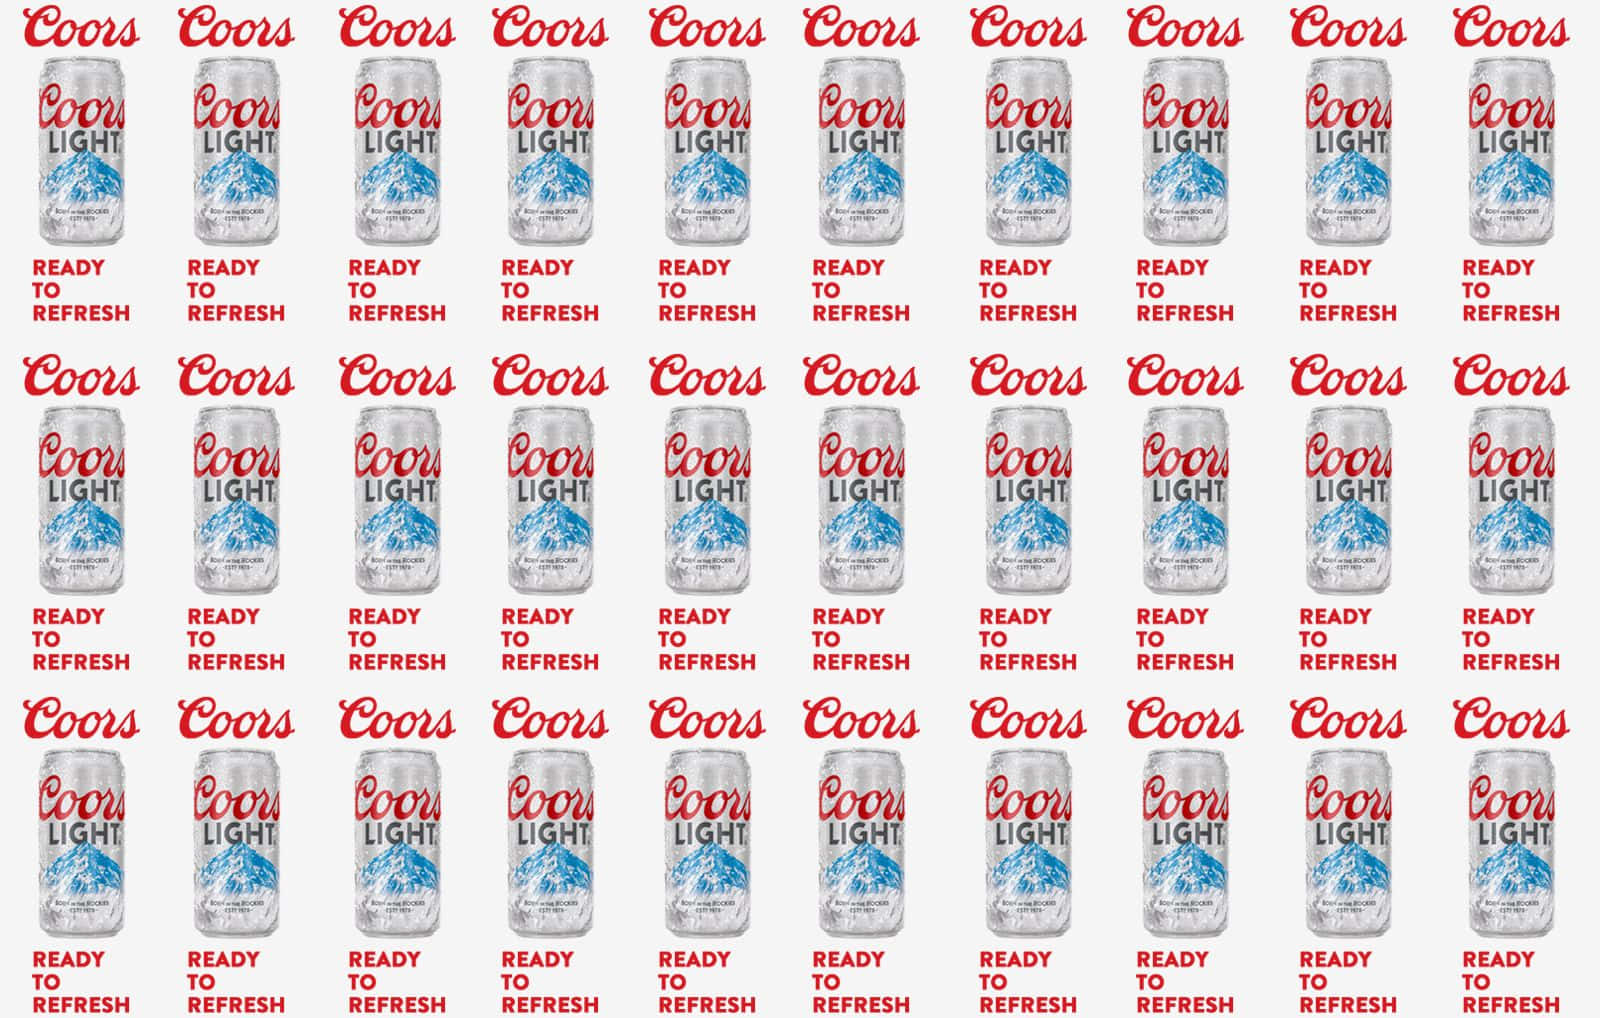 Ice-cold Coors Light: Refreshing and Crisp Wallpaper